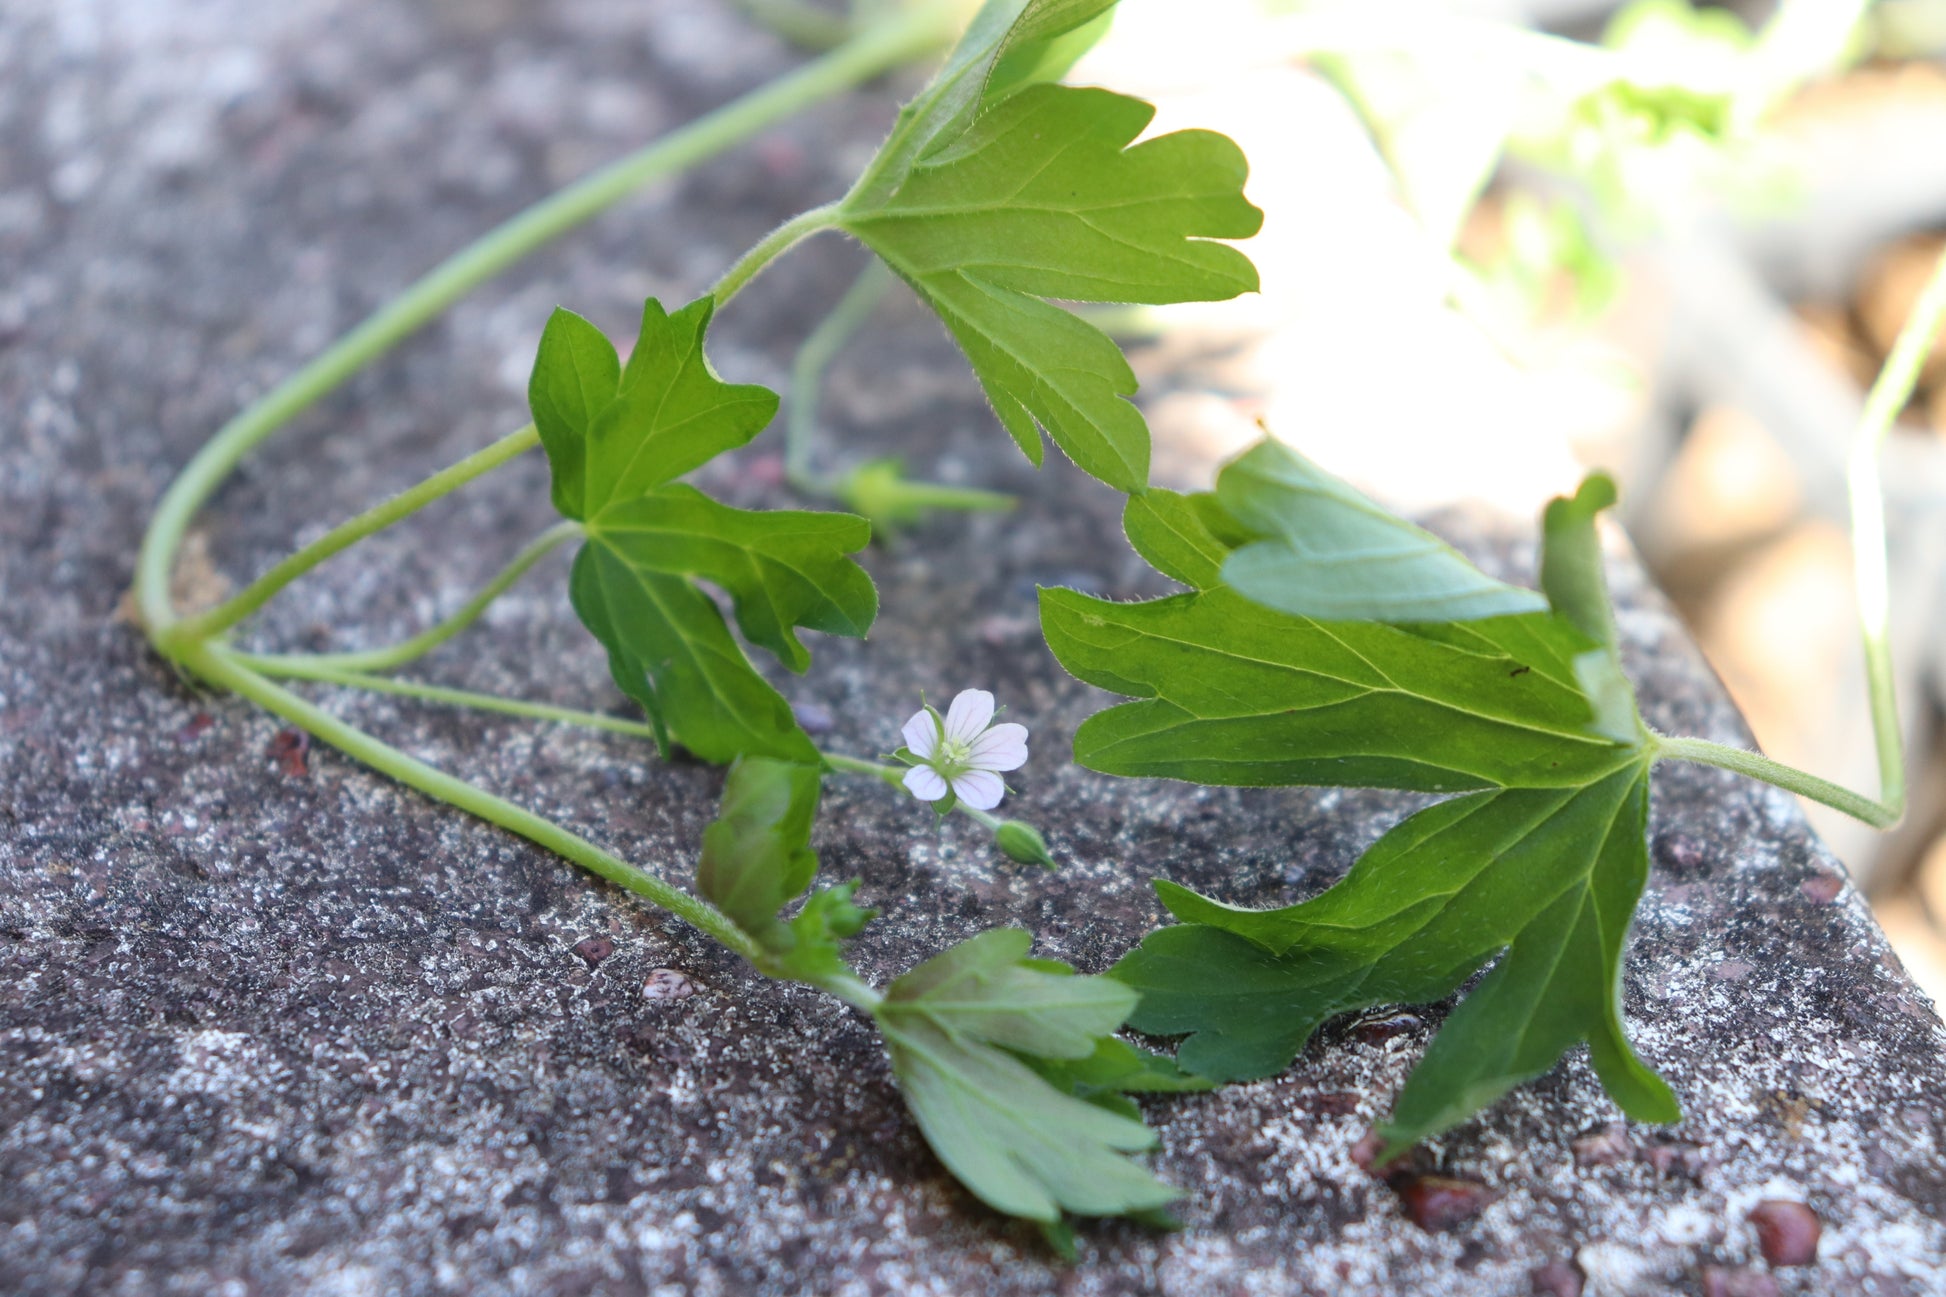 Very small white flower and lovely green foliage on Geranium homeanum